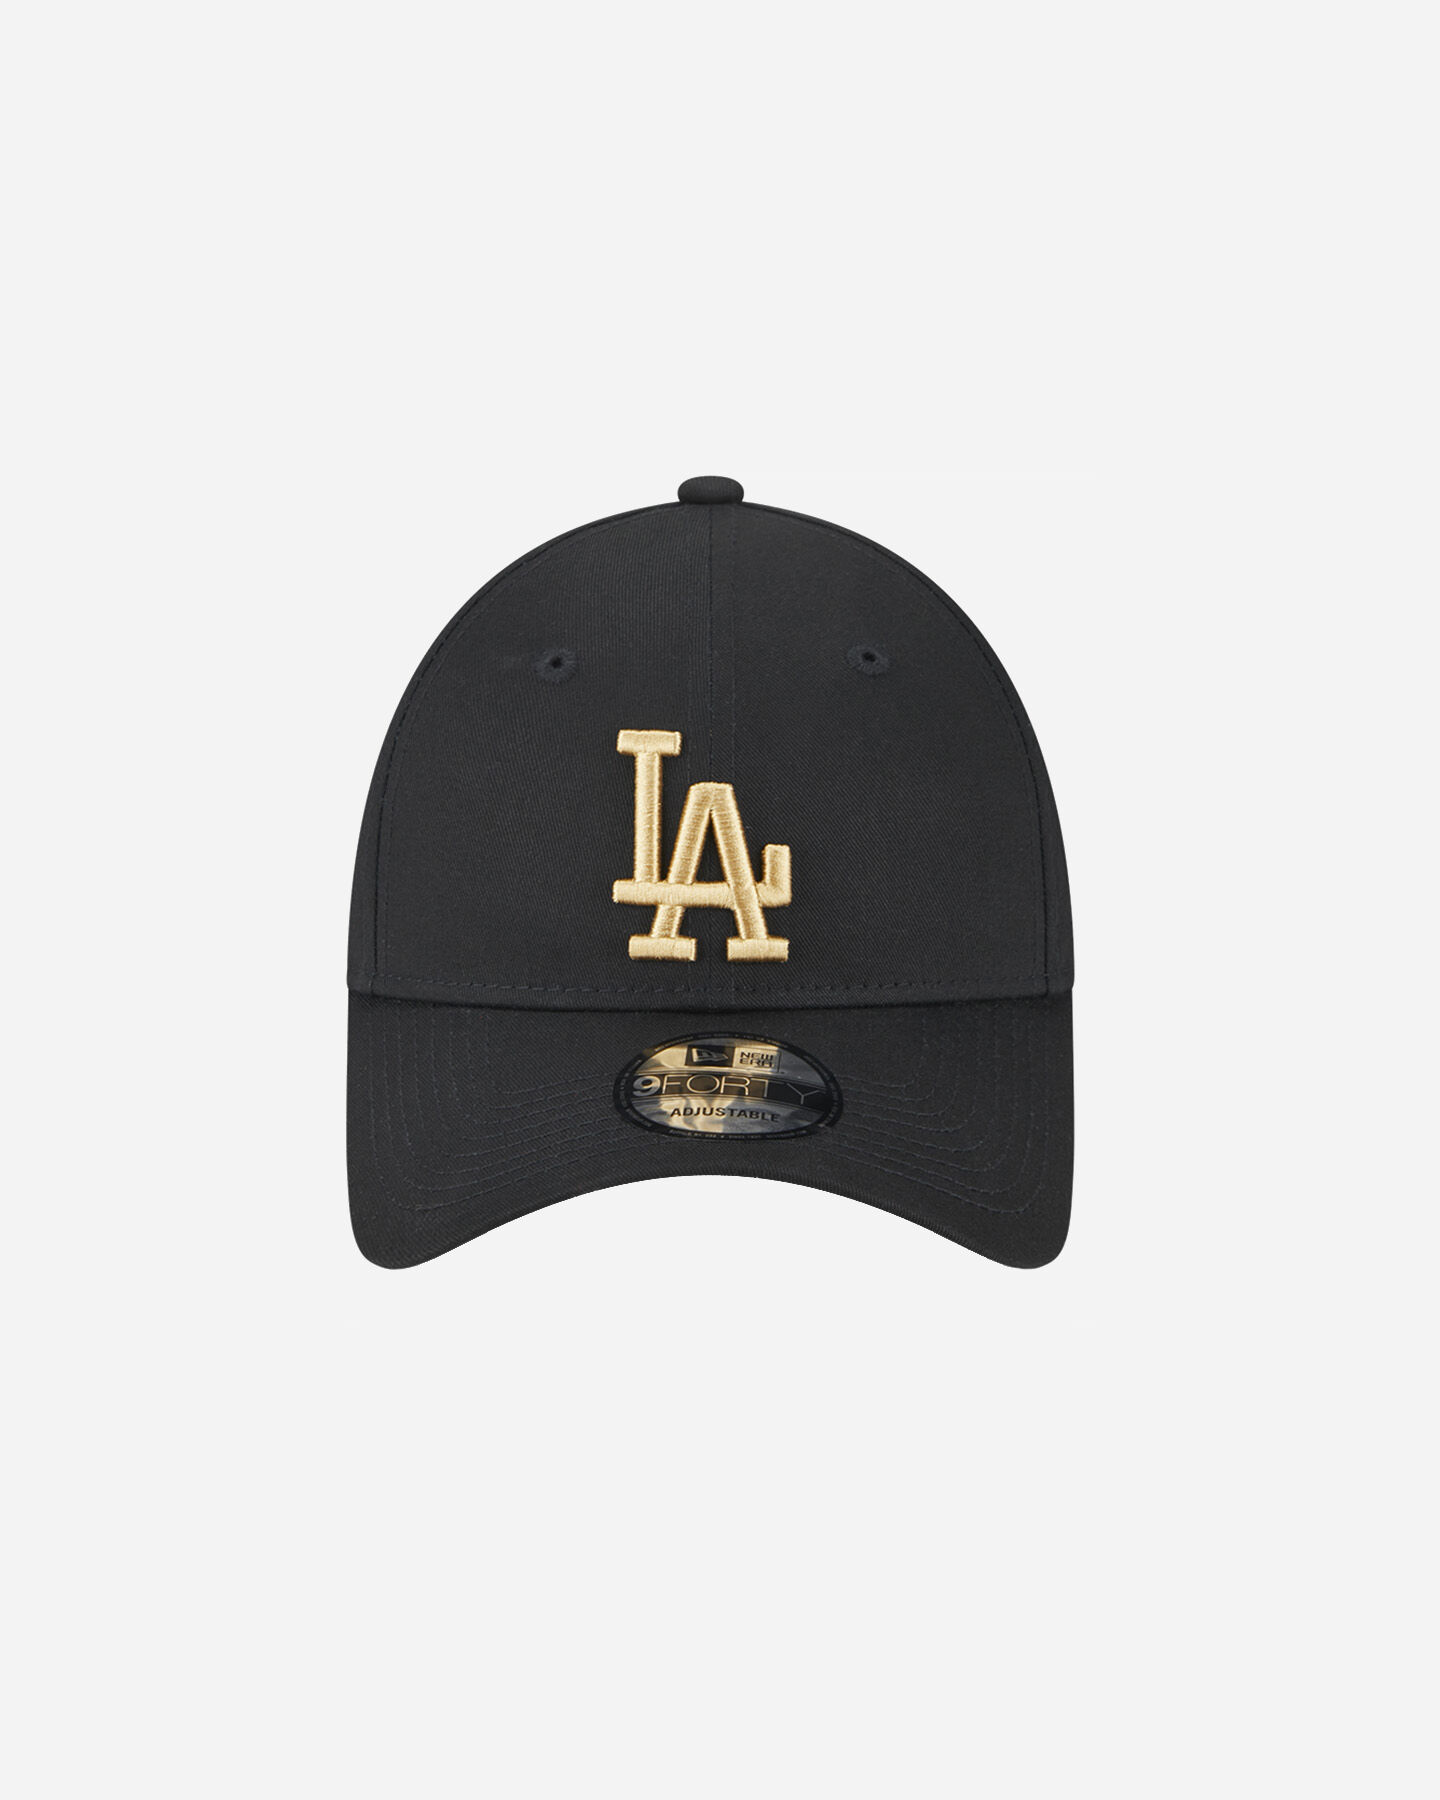  Cappellino NEW ERA 9FORTY MLB LEAGUE LOS ANGELES DODGERS  S5630967|001|OSFM scatto 1